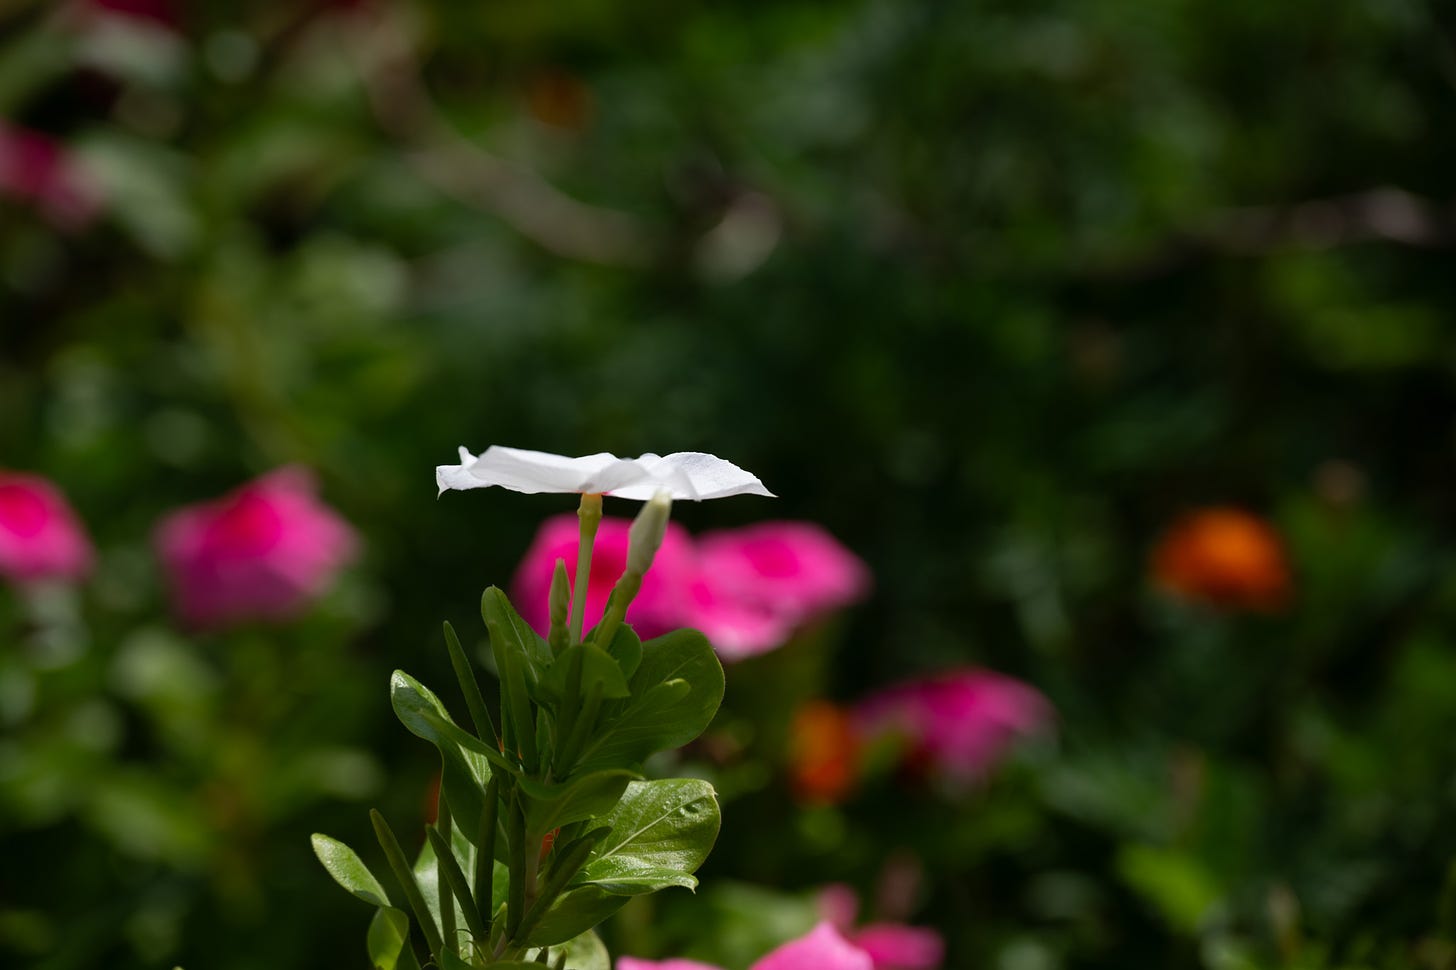 One white vinca flower captured from the side looking more like a white plate; red flowers and greenery blurred in the background